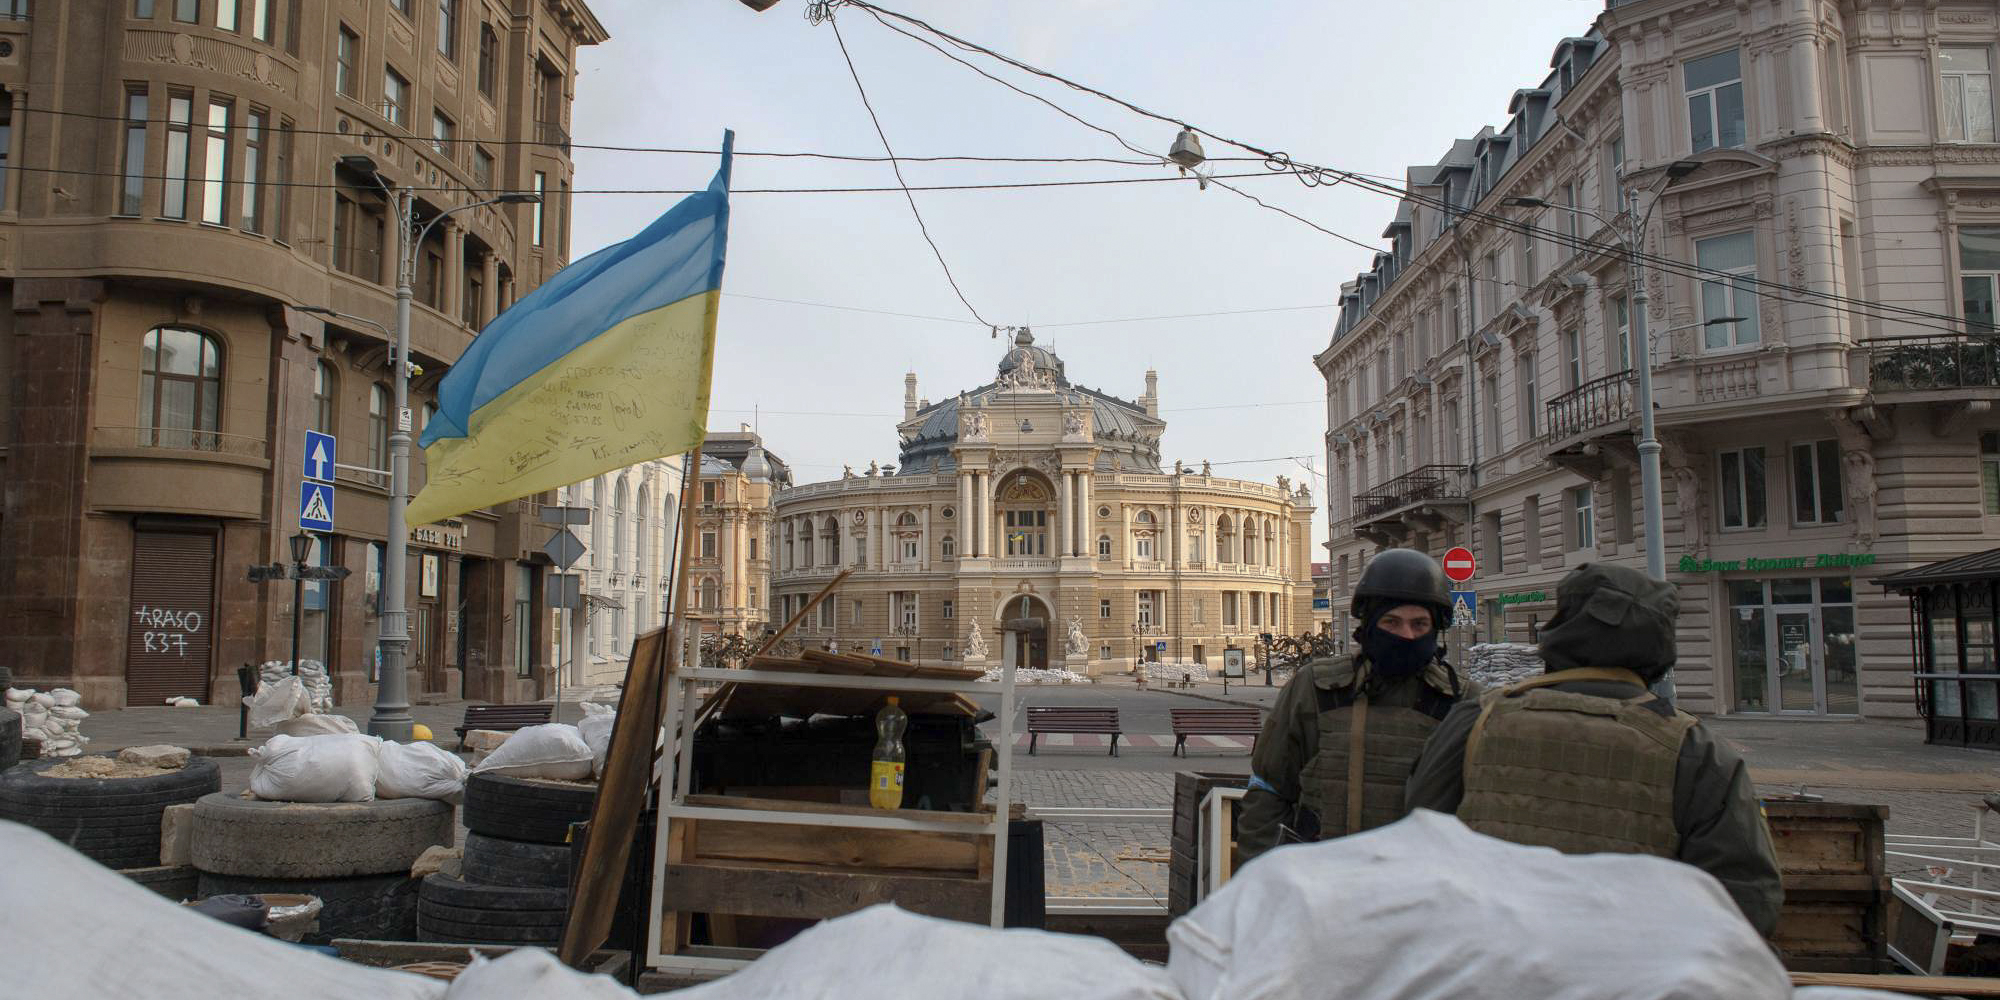 Ukraine's historic downtown building flocked with people and flags in support of their country